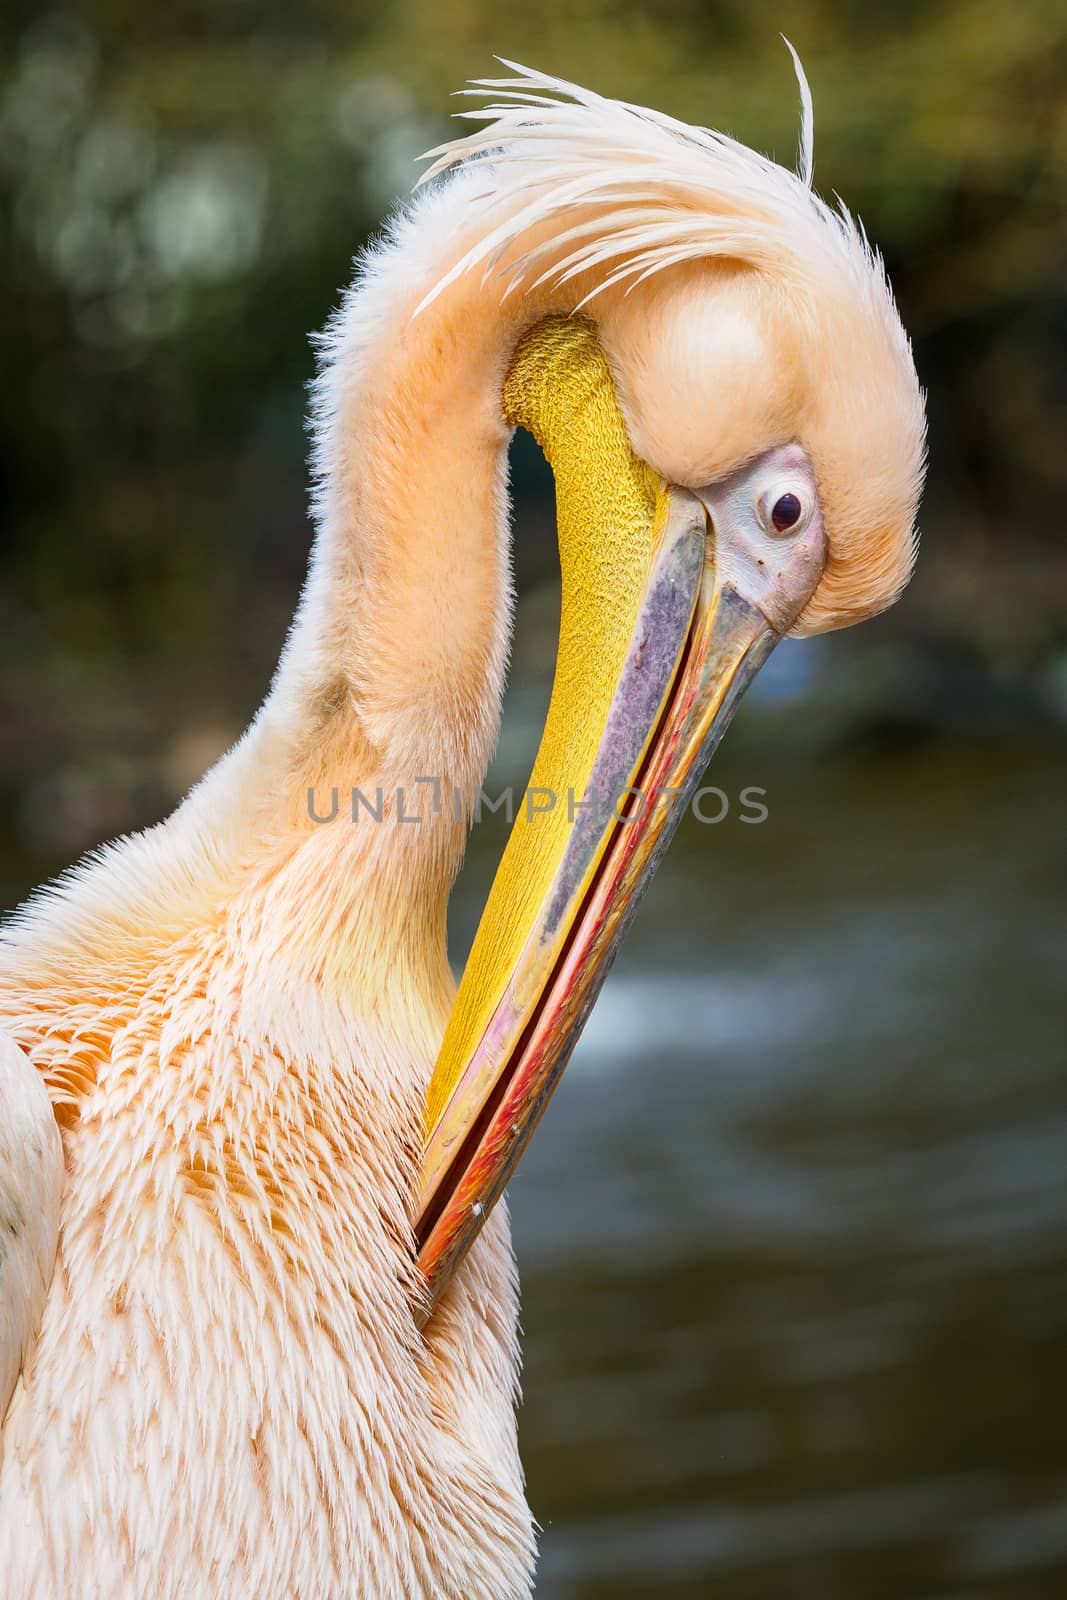 Pelecanus onocrotalus also known as the eastern white pelican, r by xtrekx